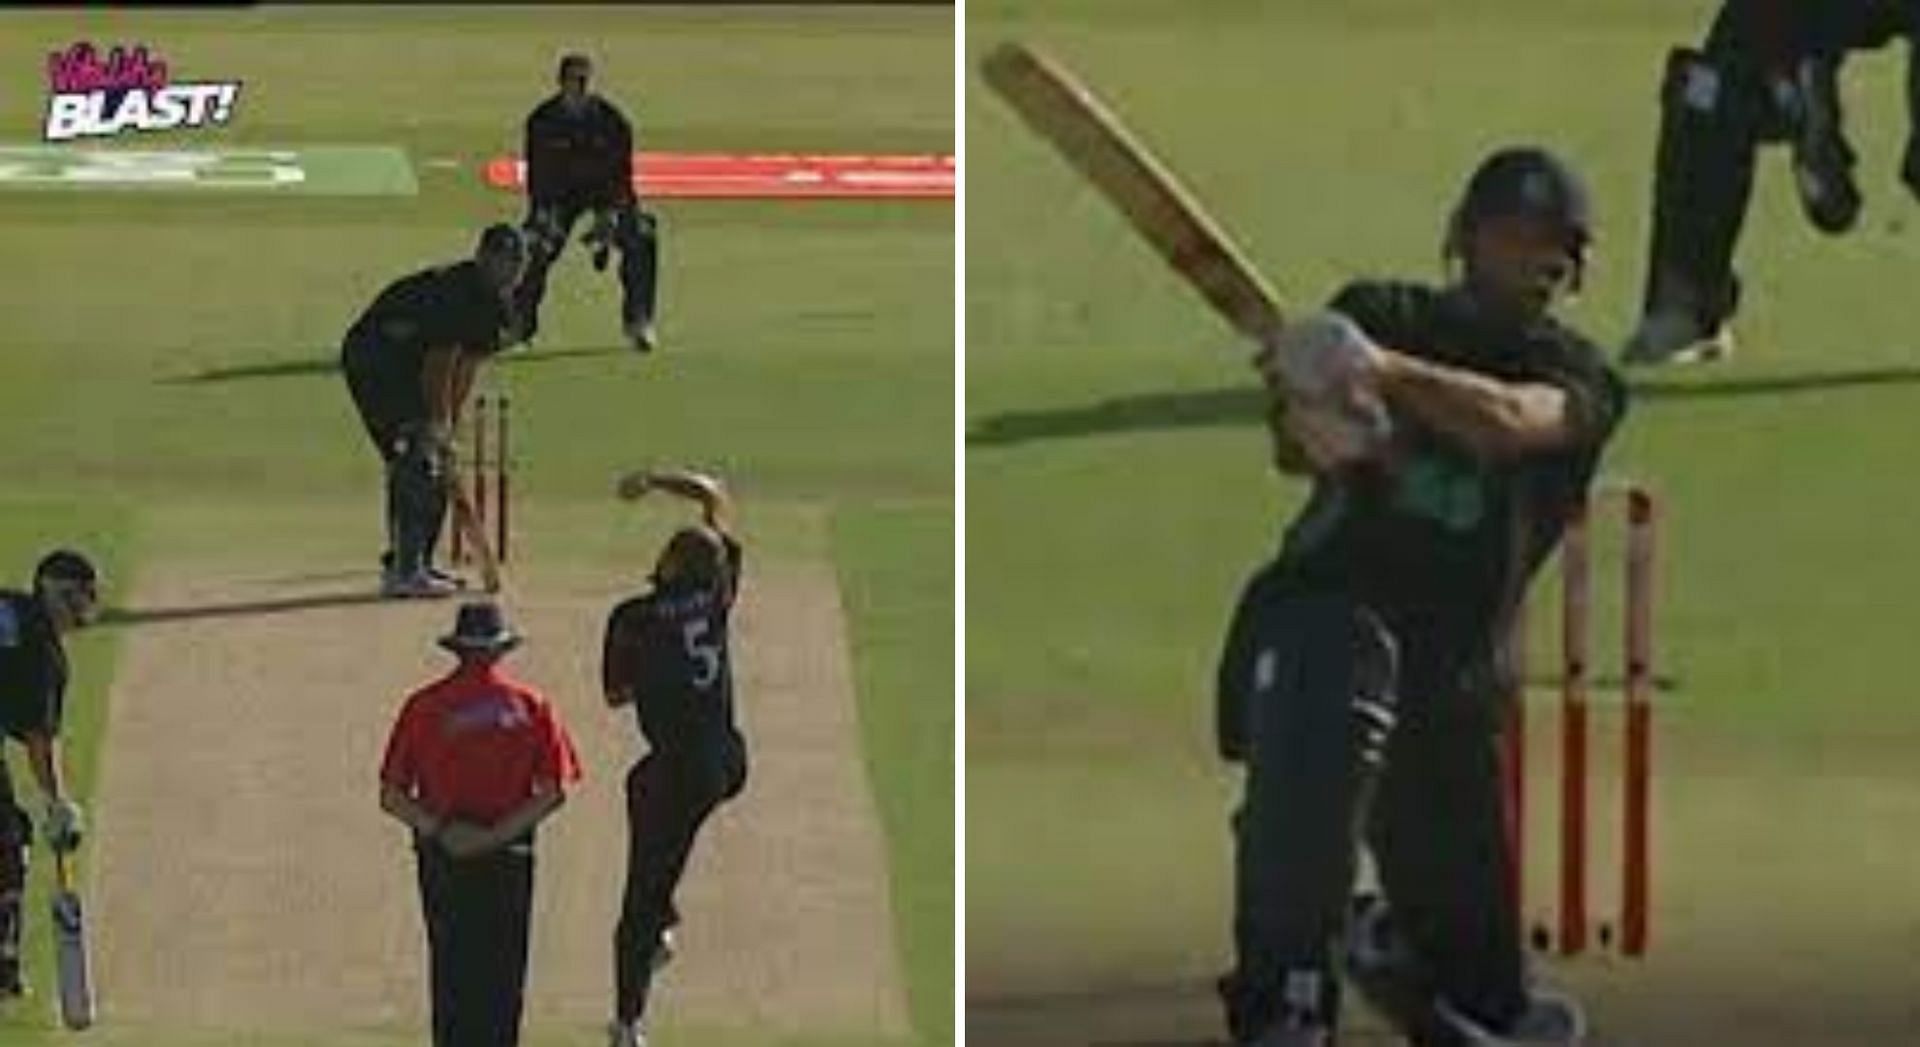 [Watch] When Wasim Akram hit the first-ever six in T20 cricket history 20 years ago